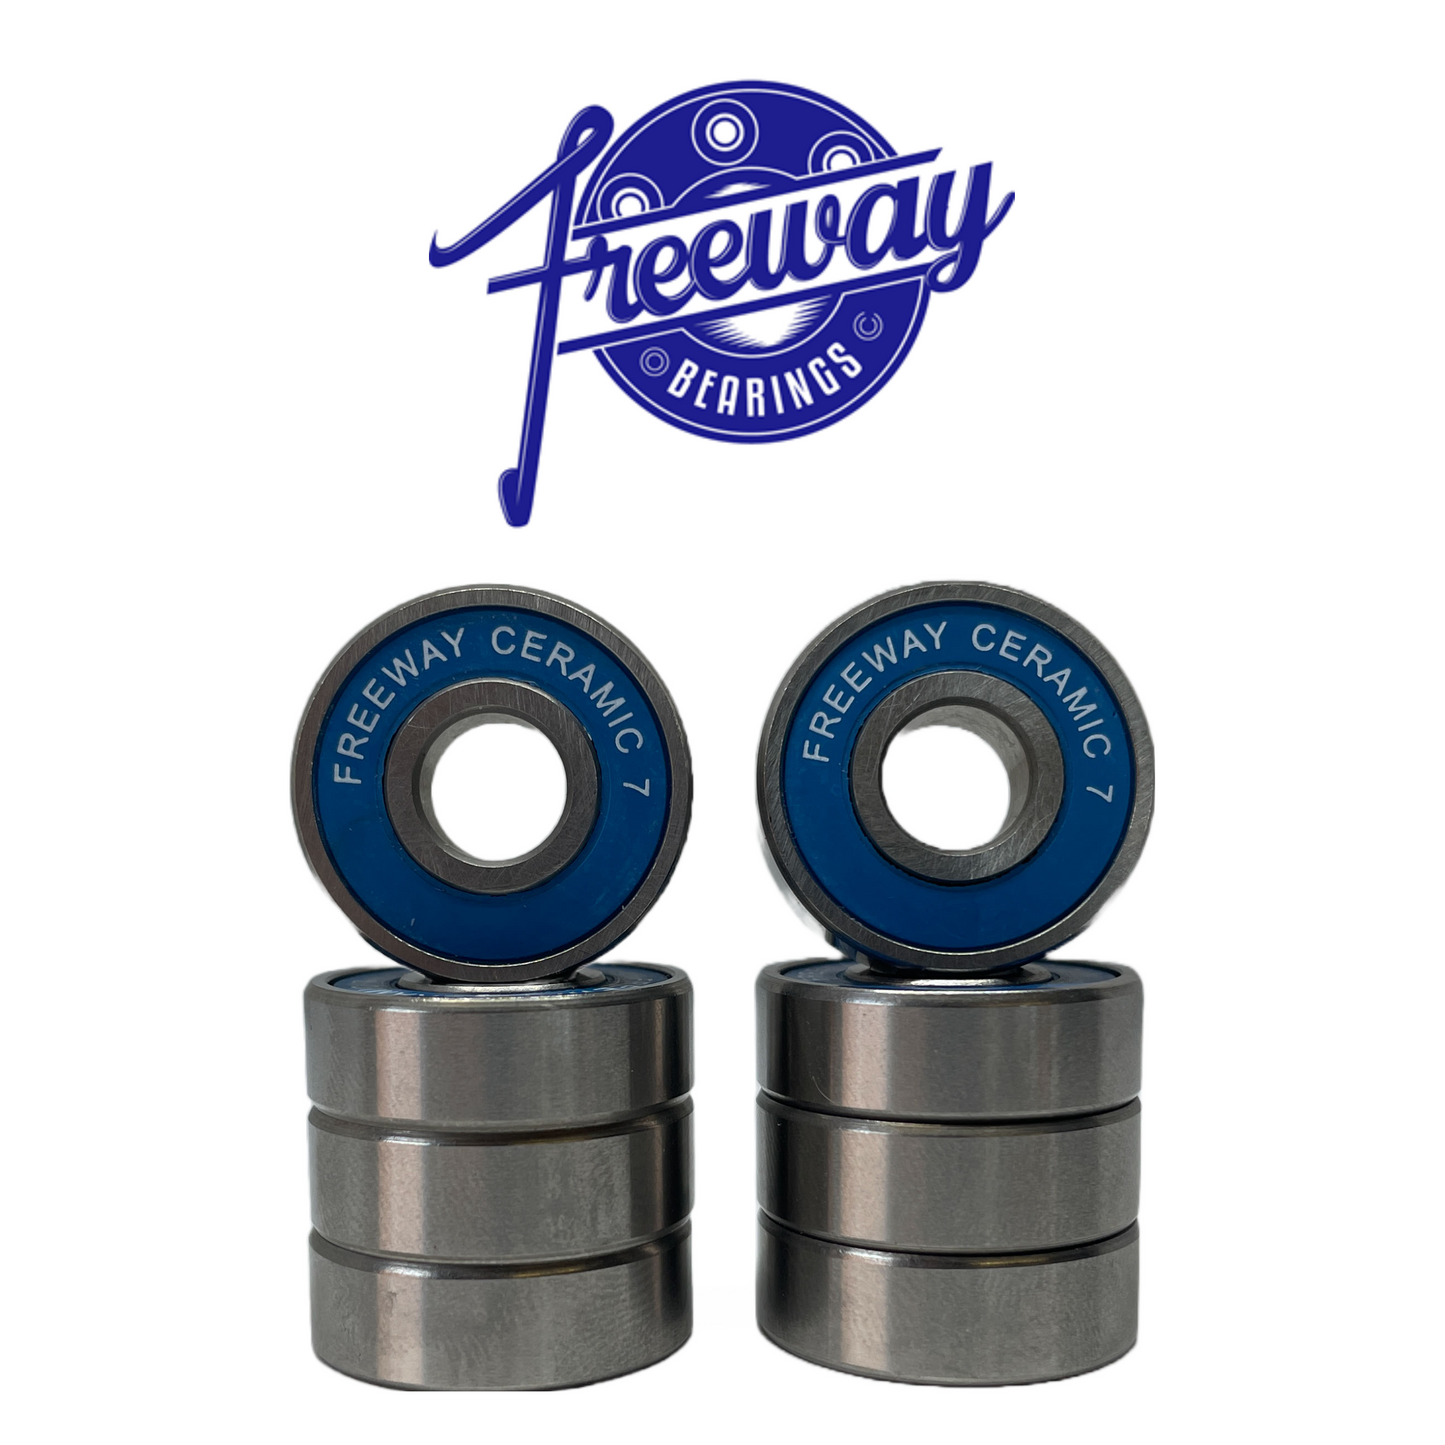 Freeway ZR Ceramic - Only $5.00 Ea. Sold in Tins of 8